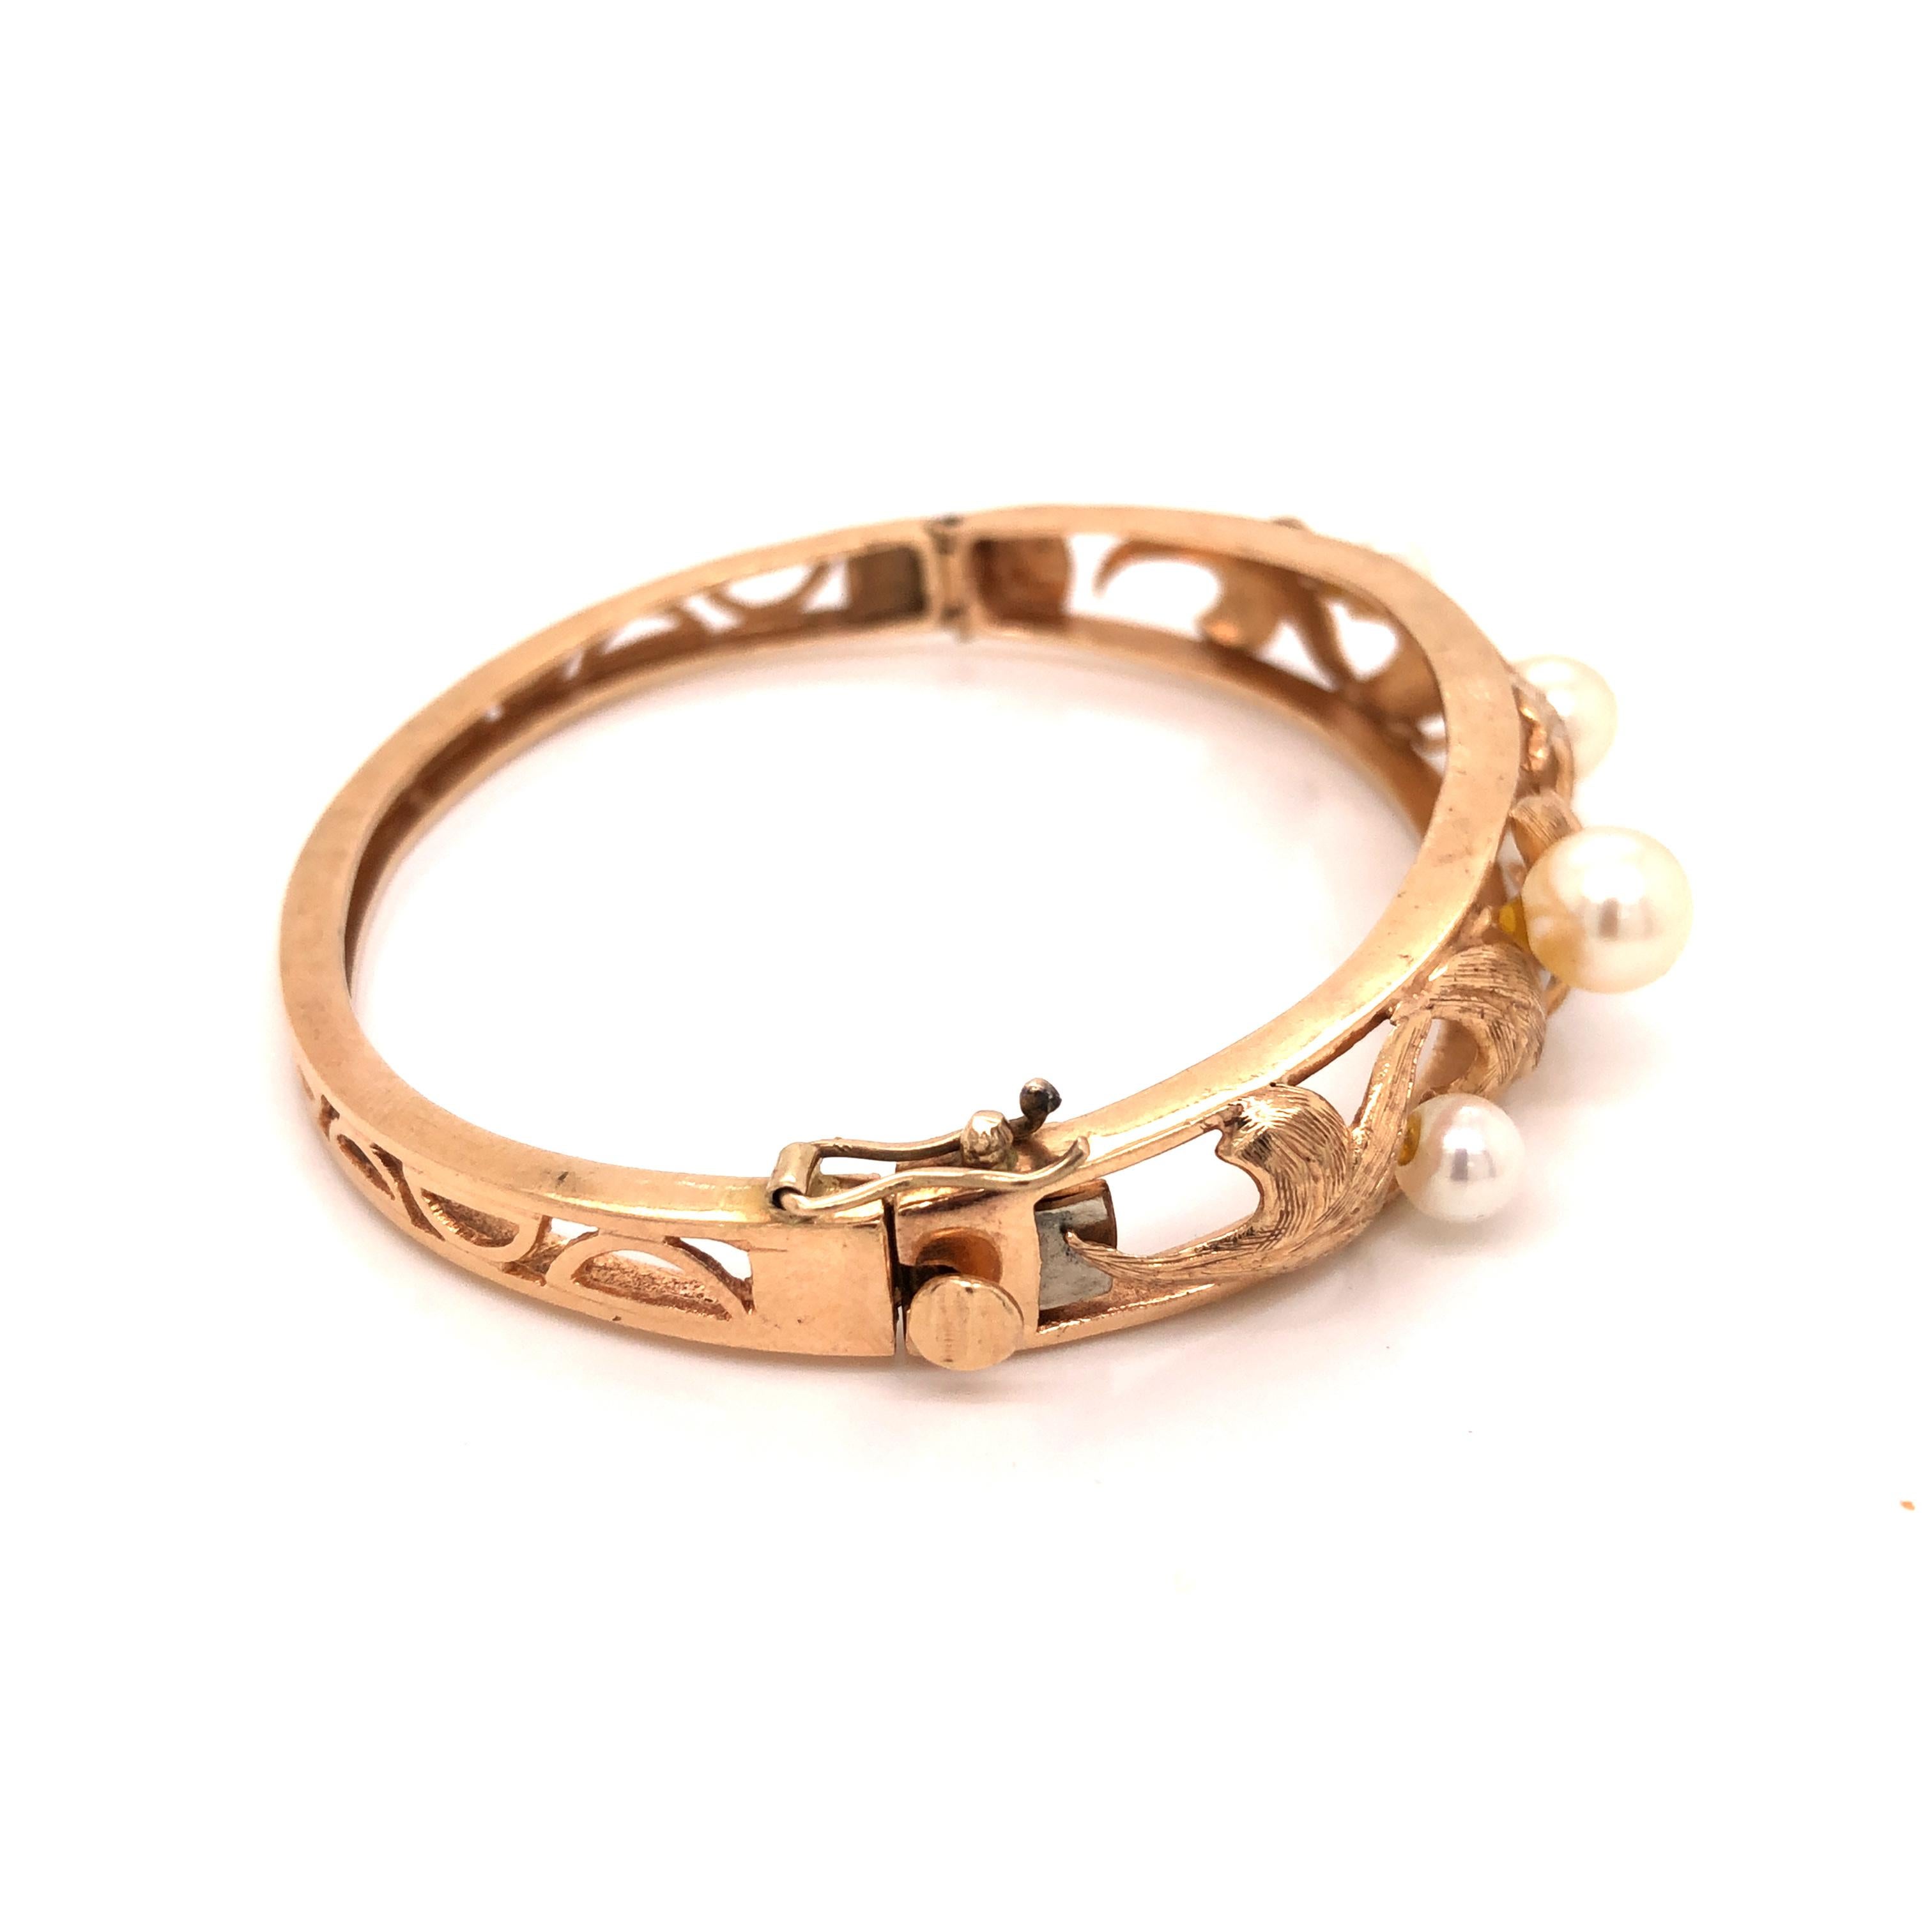  14K yellow gold bangle featuring an openwork top decorated by four cultured pearls measuring from 6.5mm to 4.6mm.

Stone: Cultured Pearl

Metal: 14K Yellow Gold

Size: 6 3/4